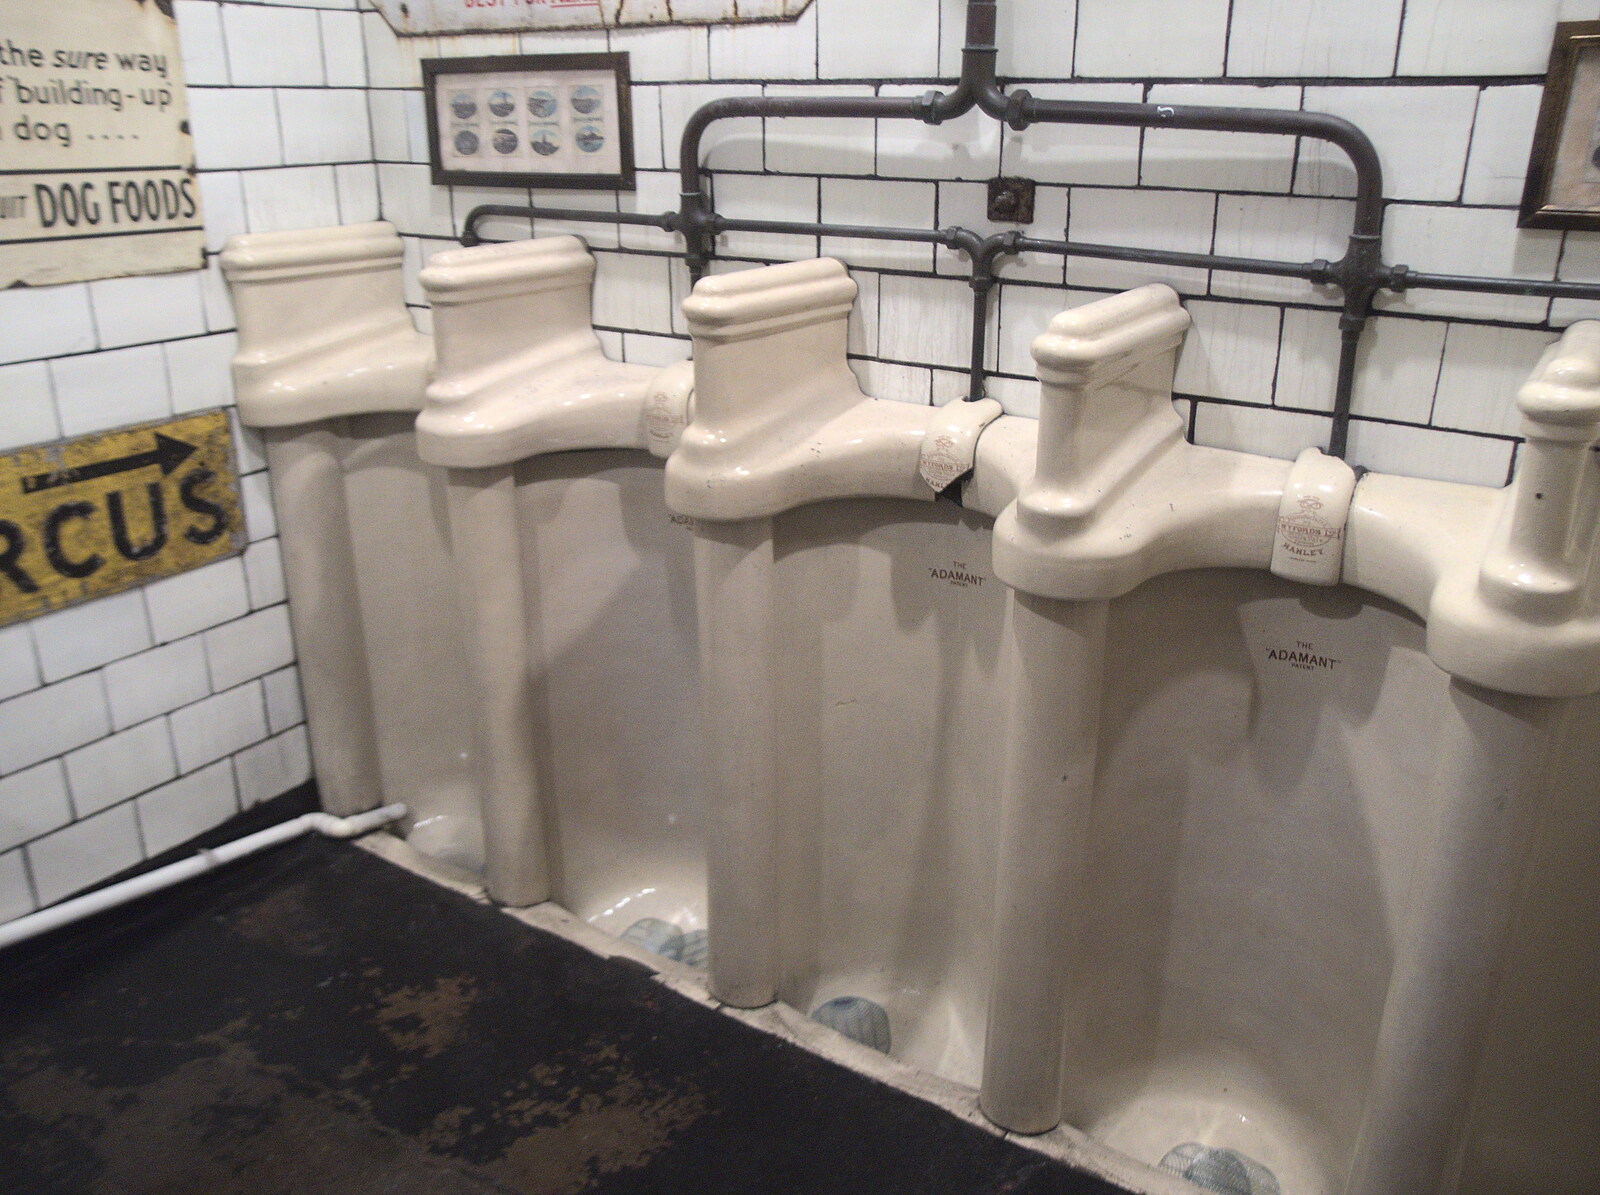 The Hippodrome has its original Edwardian urinals from The Hippodrome Christmas Spectacular, Great Yarmouth, Norfolk - 29th December 2022